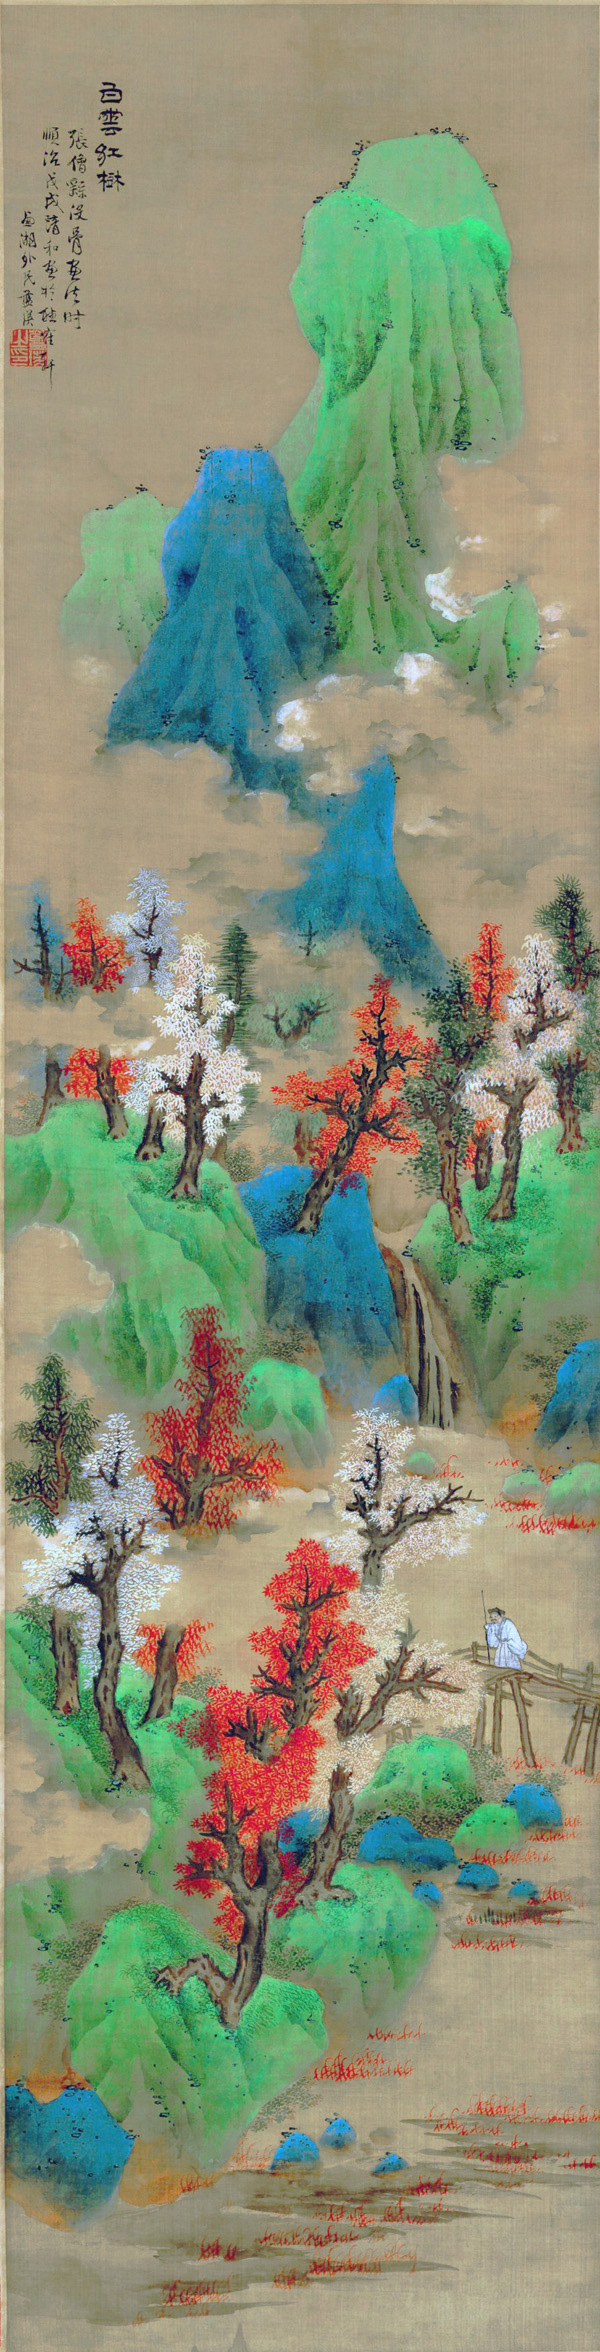 Lan Ying: White Clouds and Red Trees